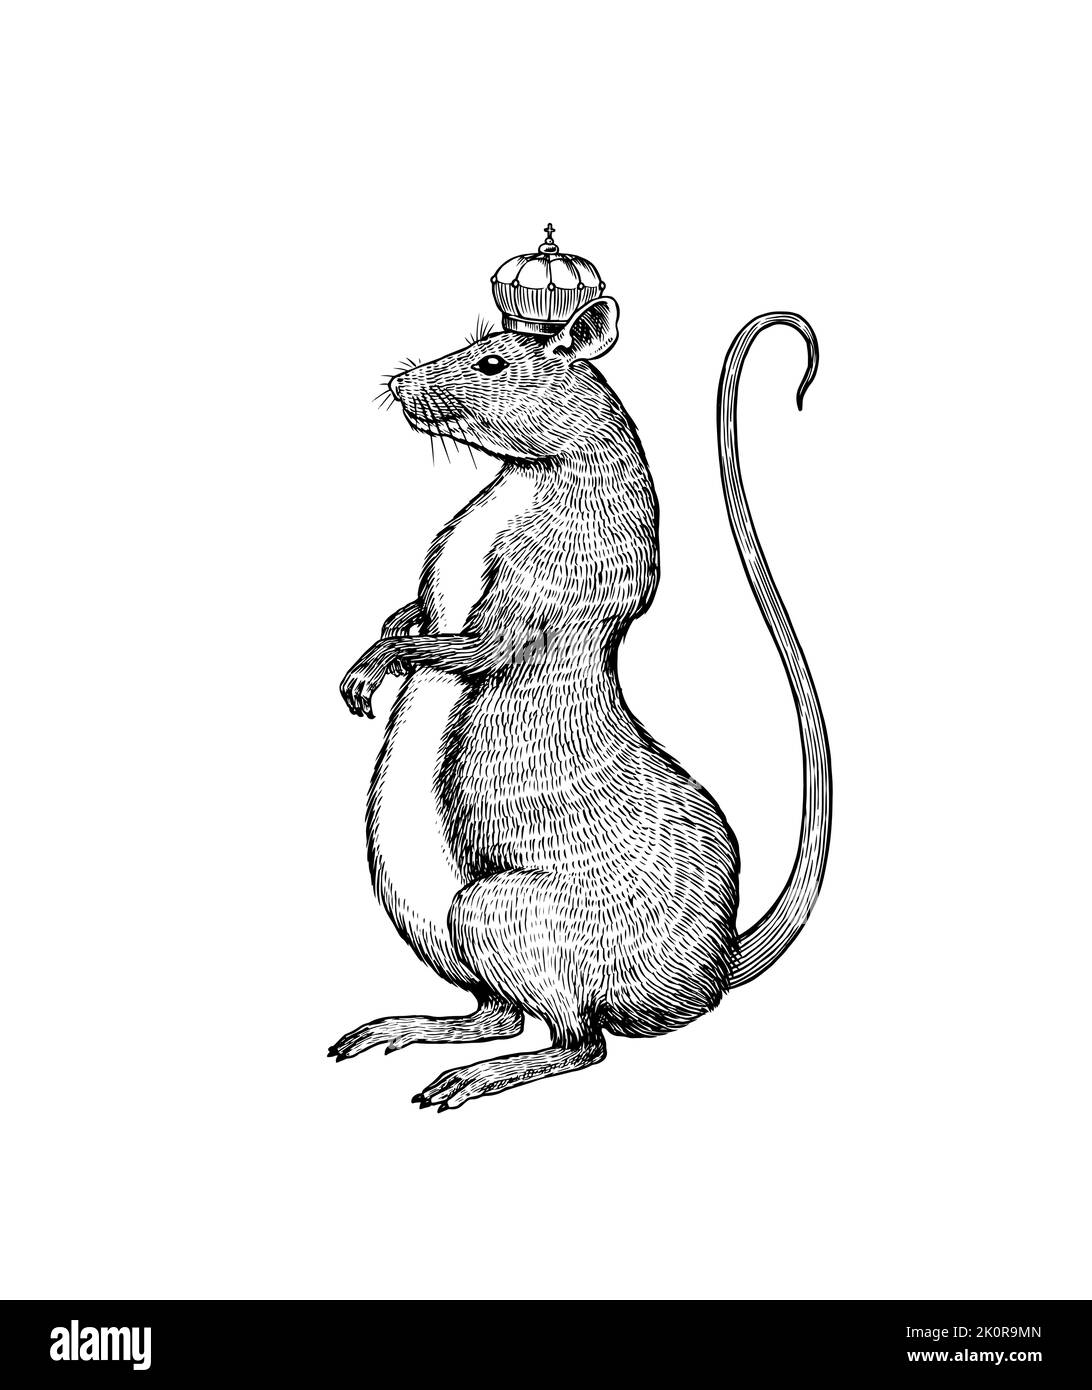 Spiteful And Insidious Old Rat King With A Shabby Tail, Wearing A Gold Crown  And A Chain, Grinning Out Of Its Dark Hole, Vector Cartoon Illustration On  A White Background Royalty Free